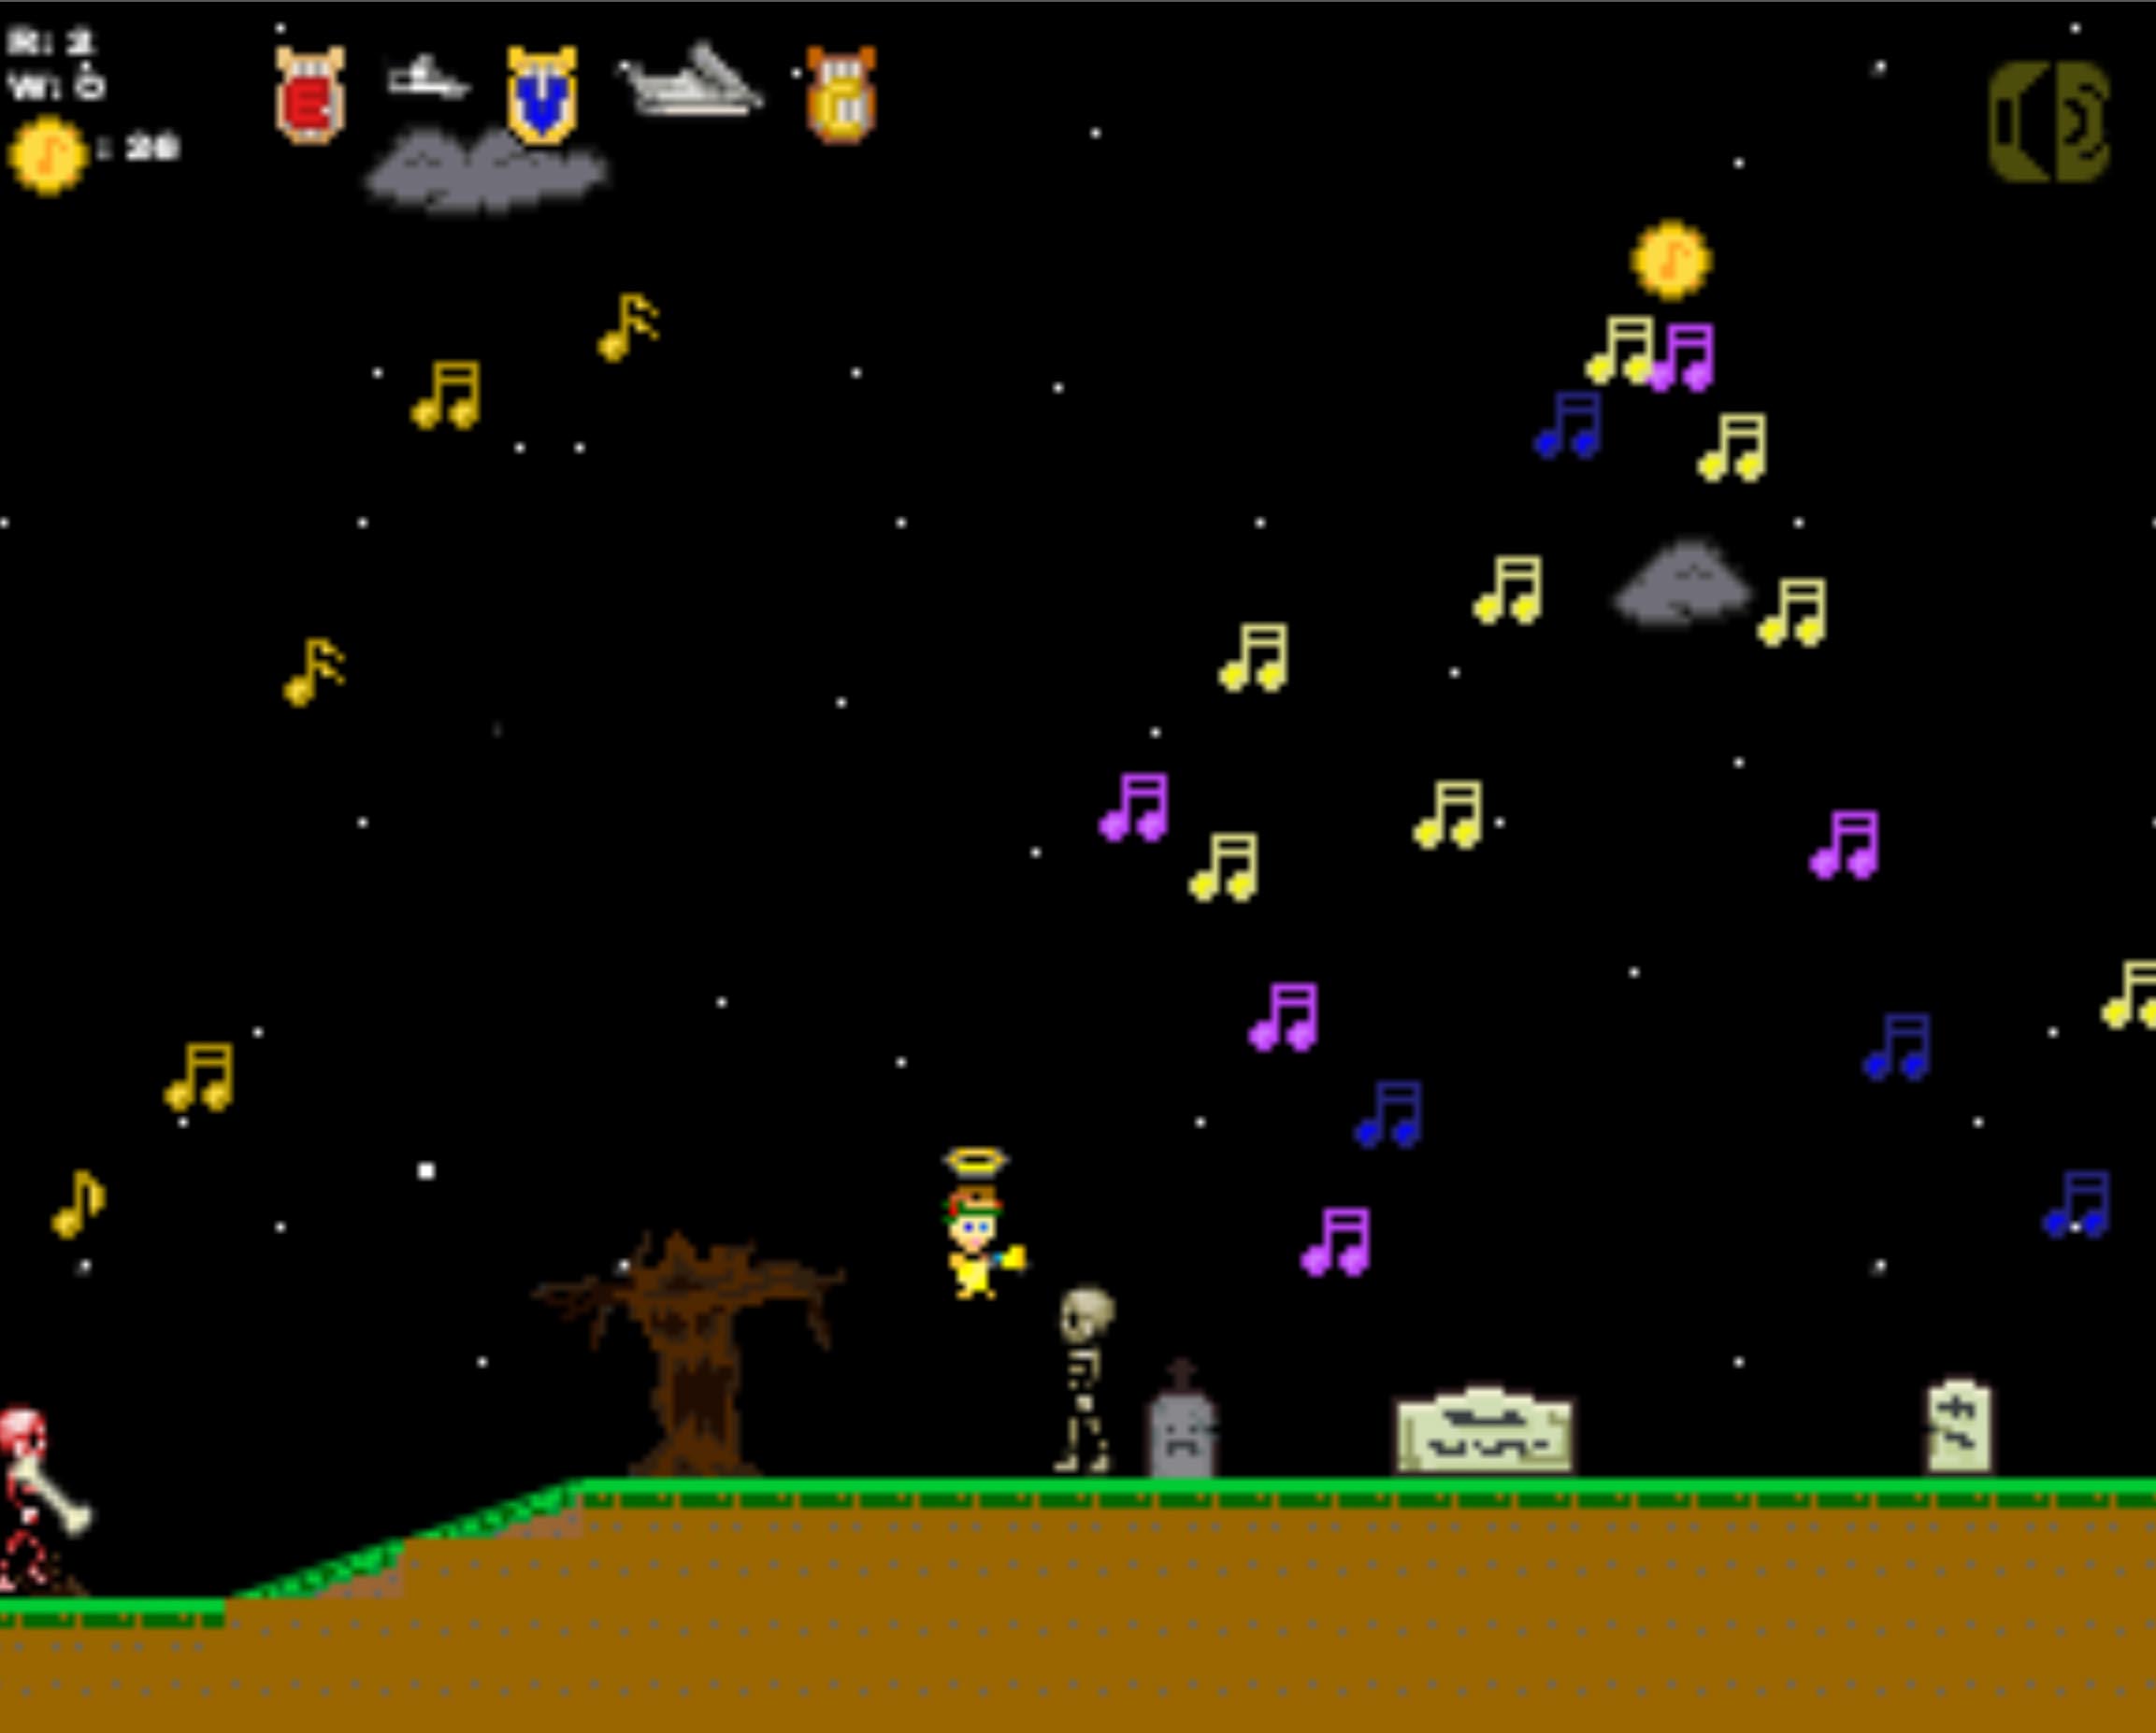 This is a screenshot from Orpheus the Lyrical. Orpheus has an invincibility powerup and is shooting a bunch of enemies with musical notes.